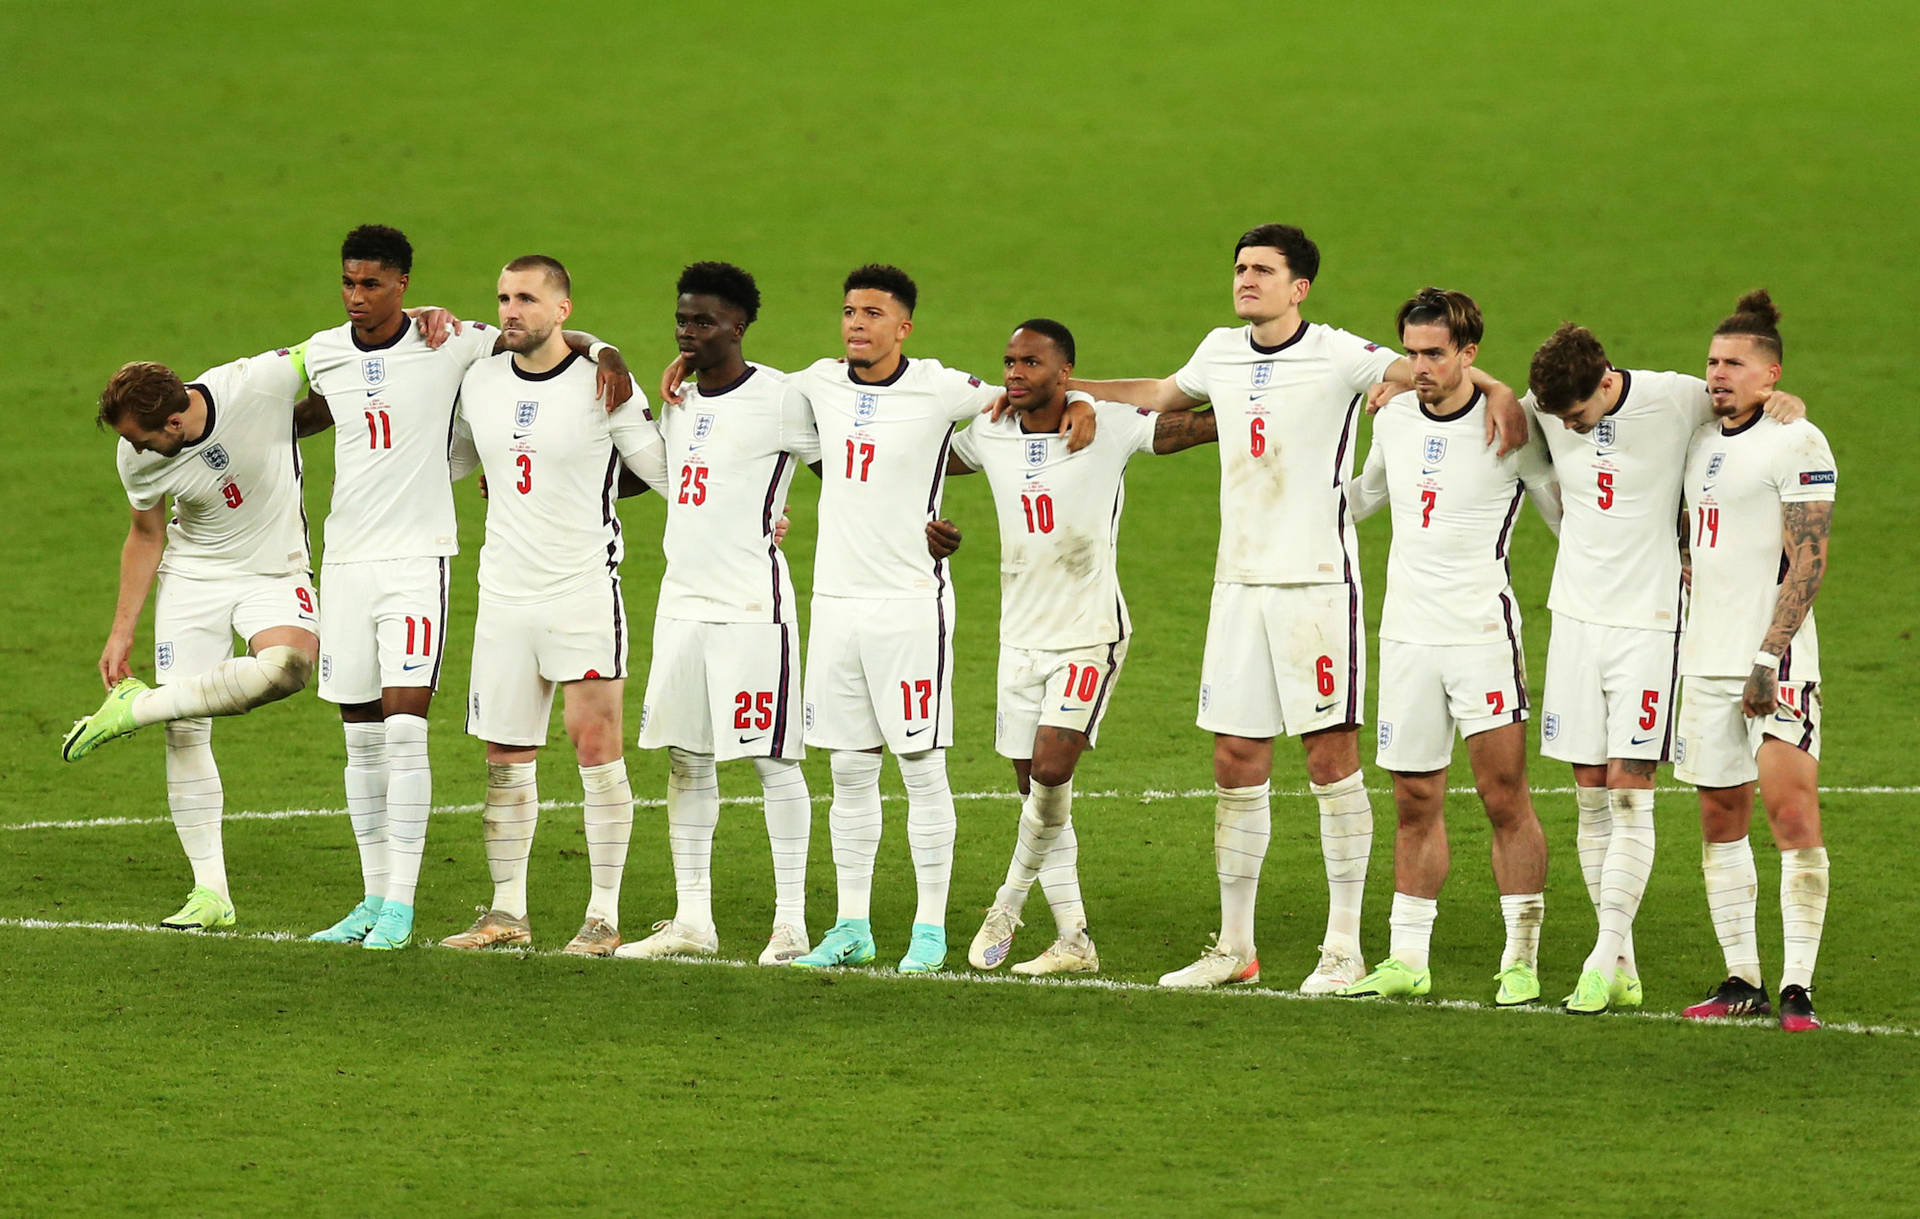 England National Football Team During Game Picture